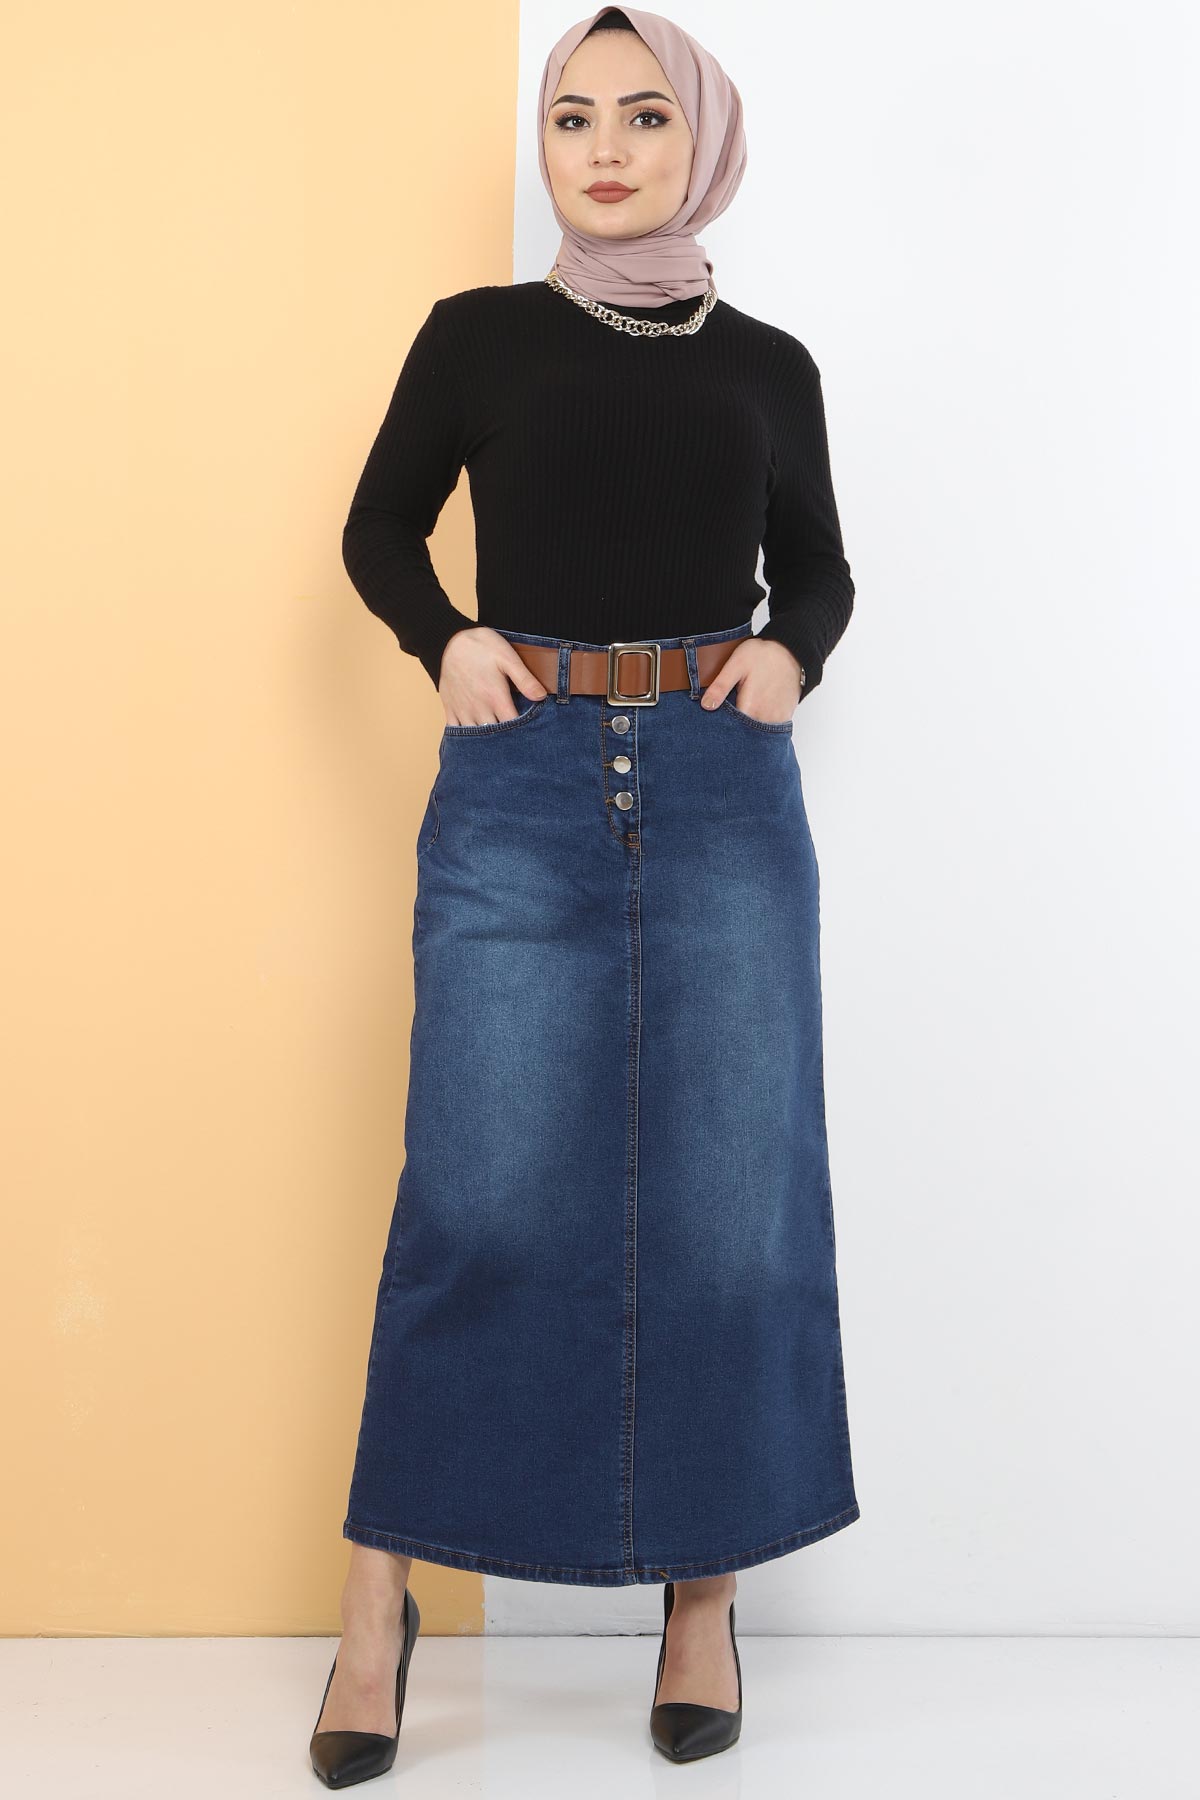 Arched Jeans Skirt TSD231015 Dark Blue